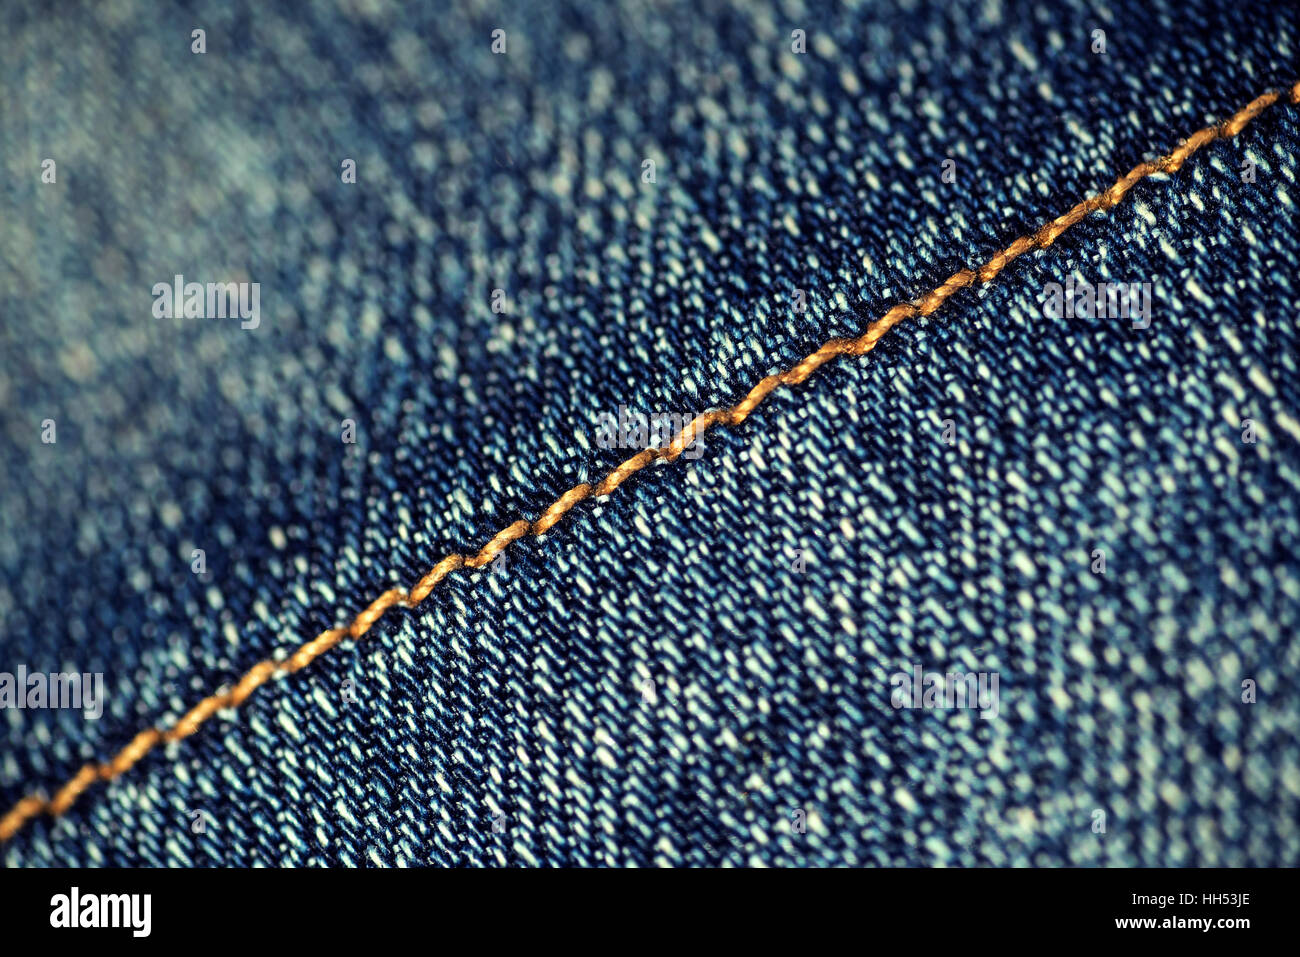 Macro closeup of yellow stitch on a pair of faded denim jeans. The thread on the material runs in a diagonal slant. Stock Photo